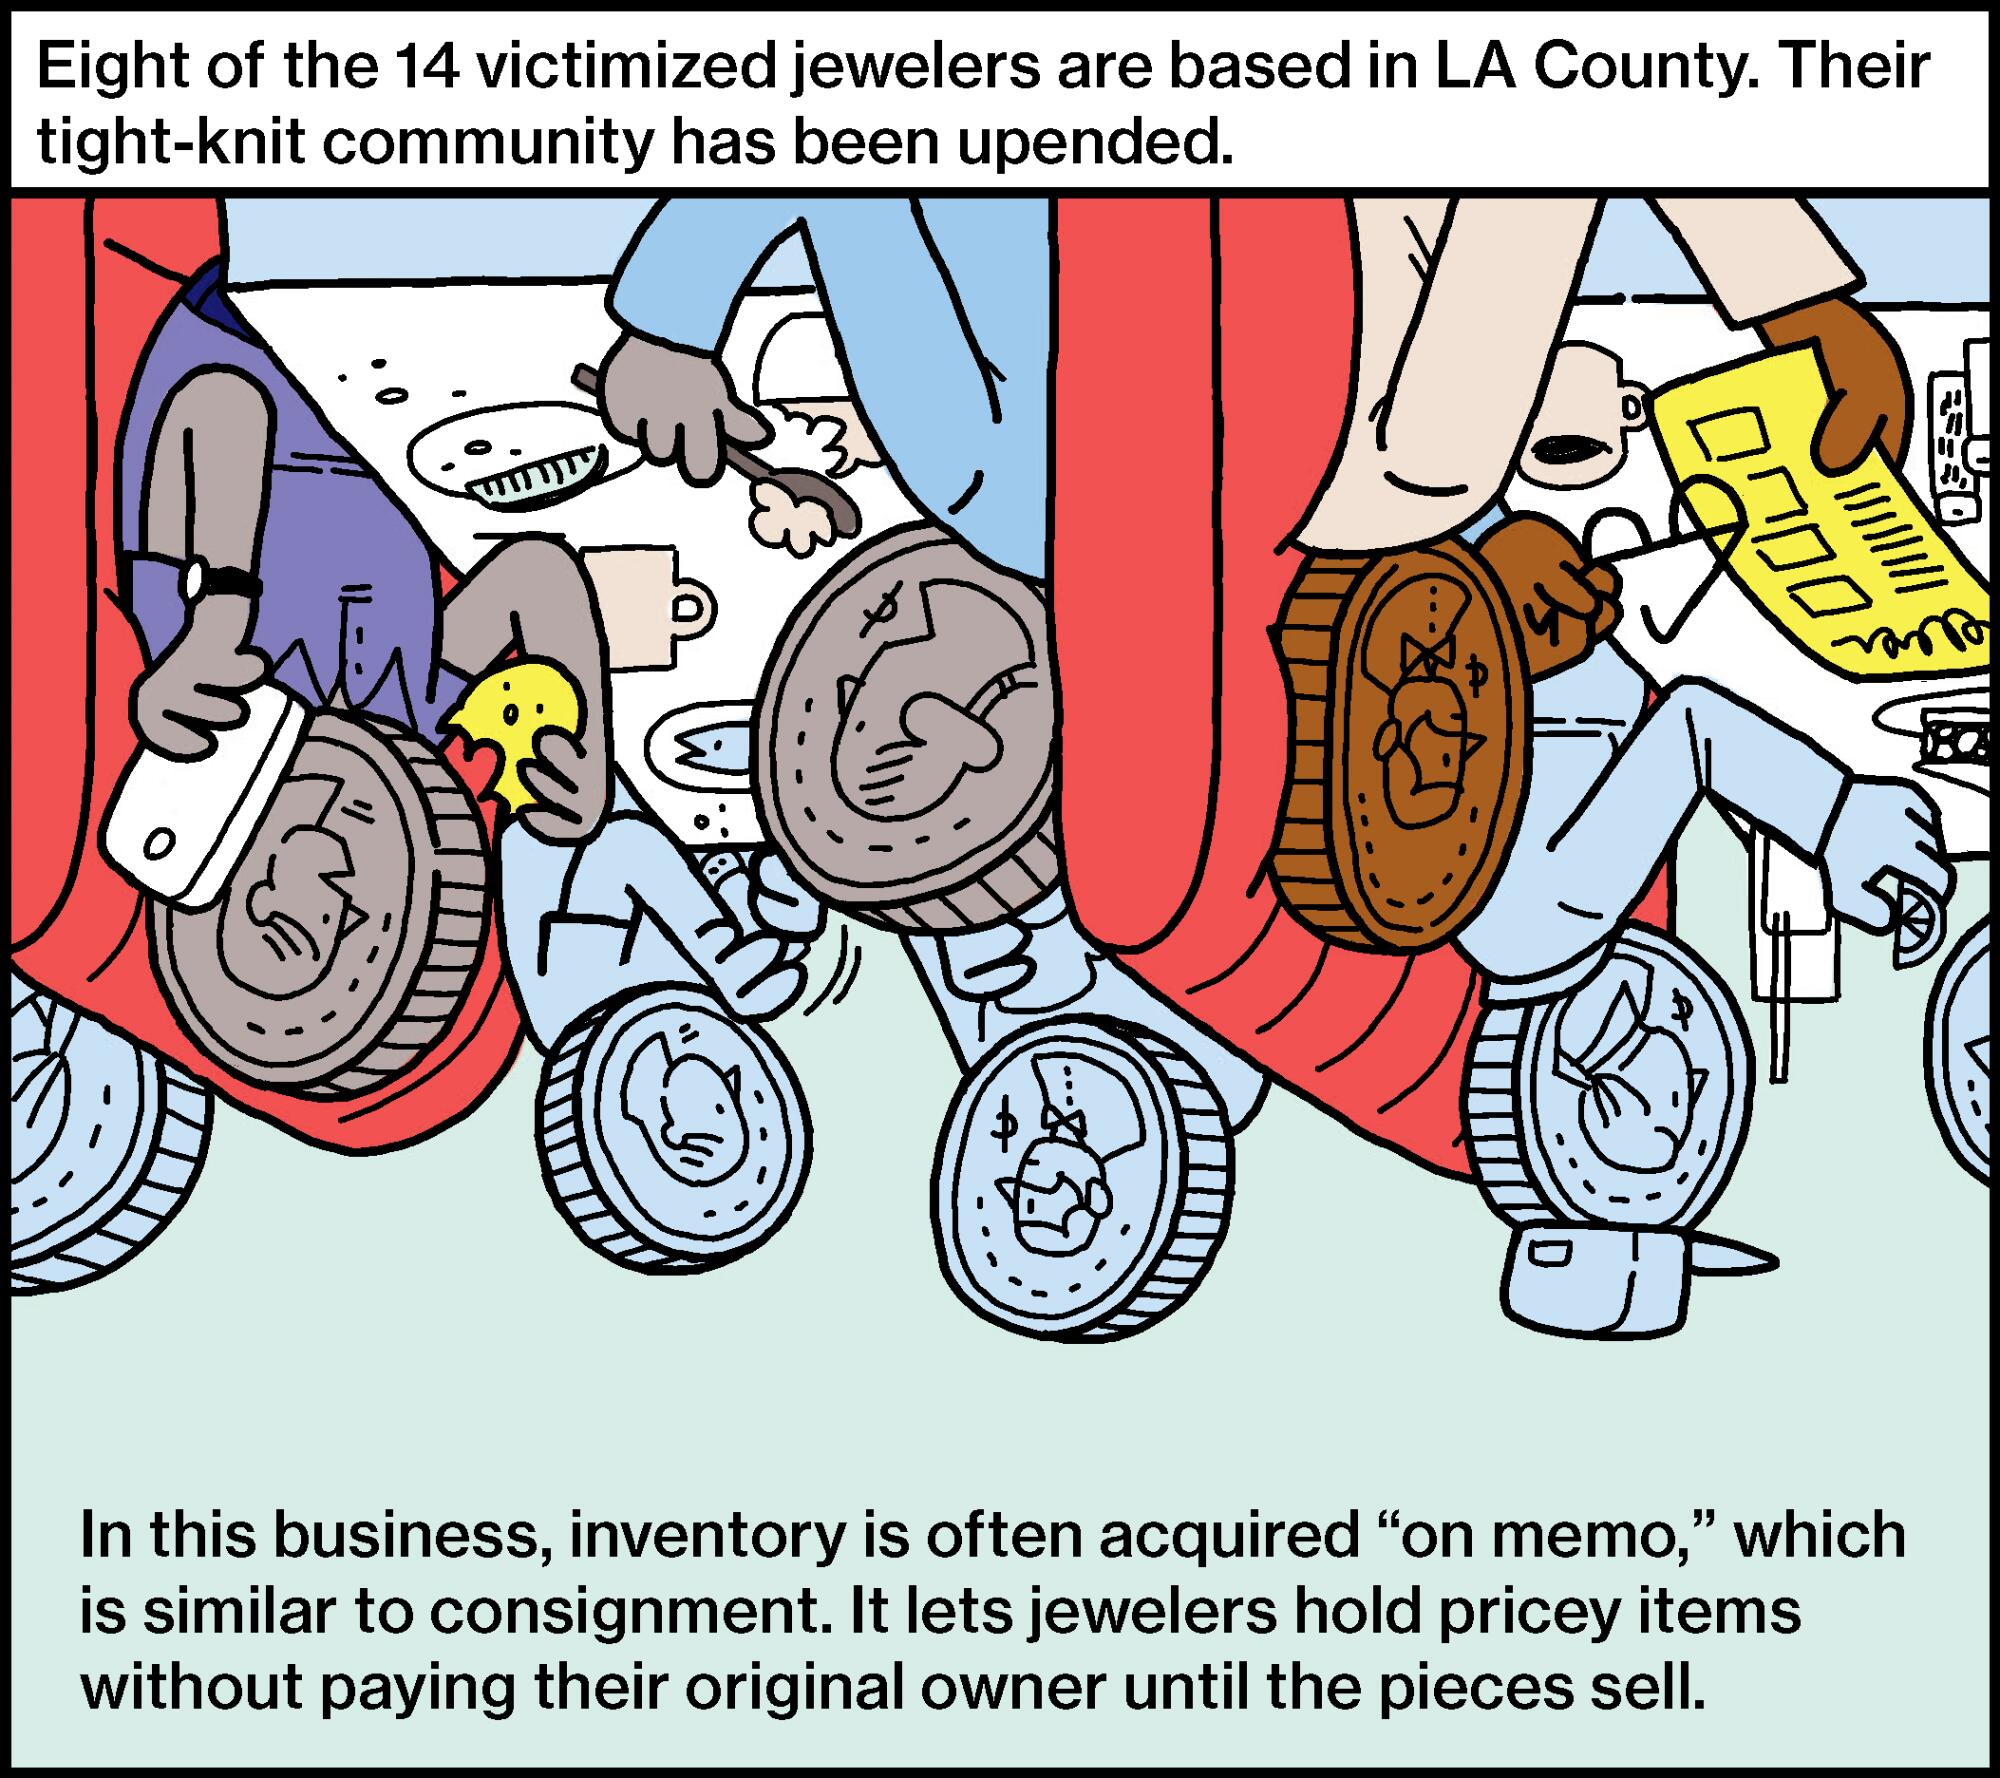 Eight of the 14 victimized jewelers are based in LA County. Their tight-knit community has been upended.